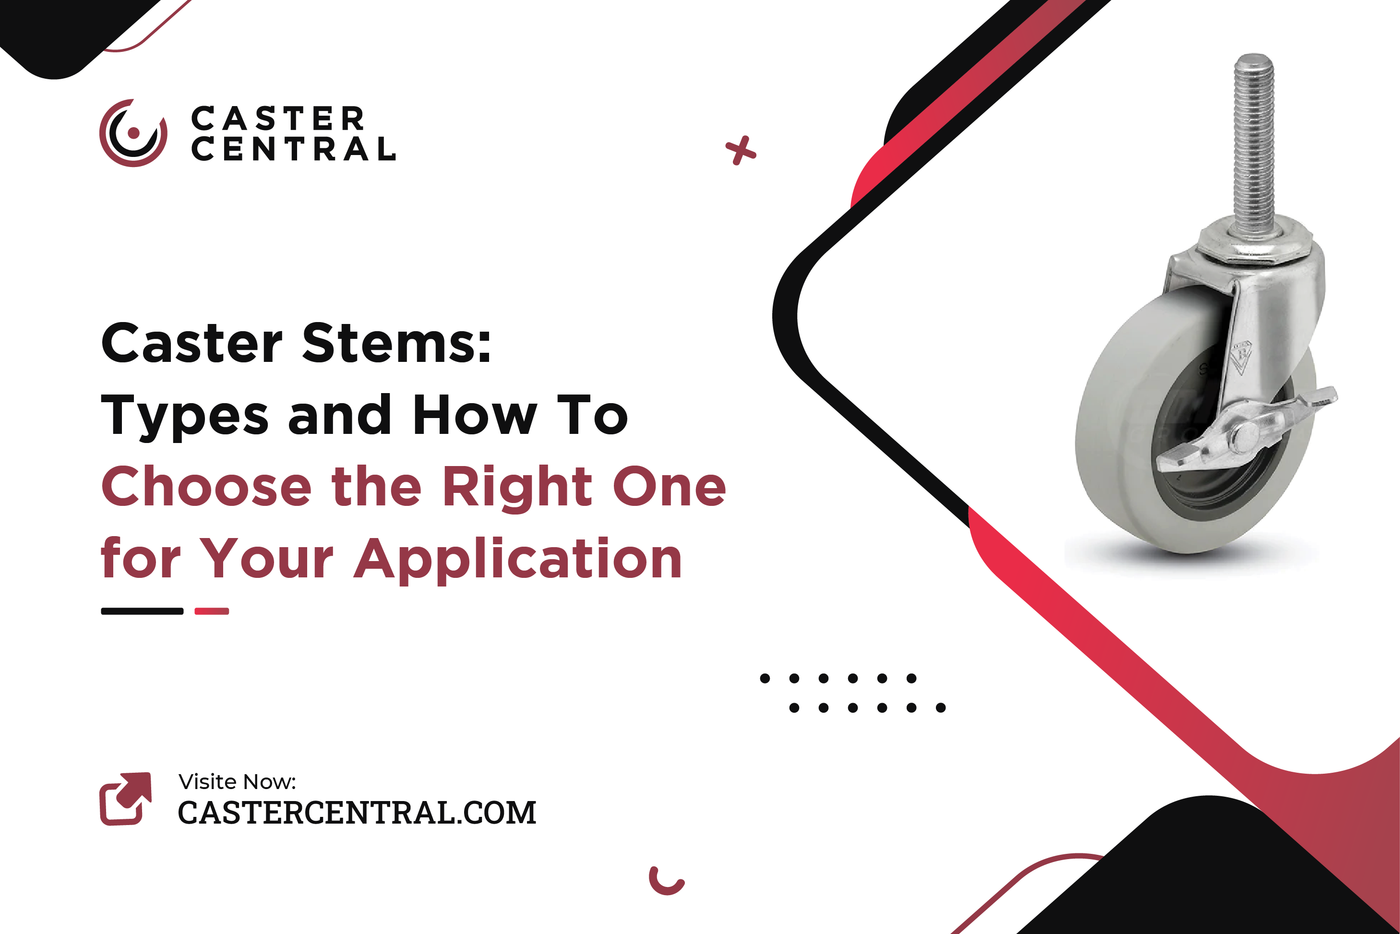 Caster Stems: Types and How To Choose the Right One for Your Application